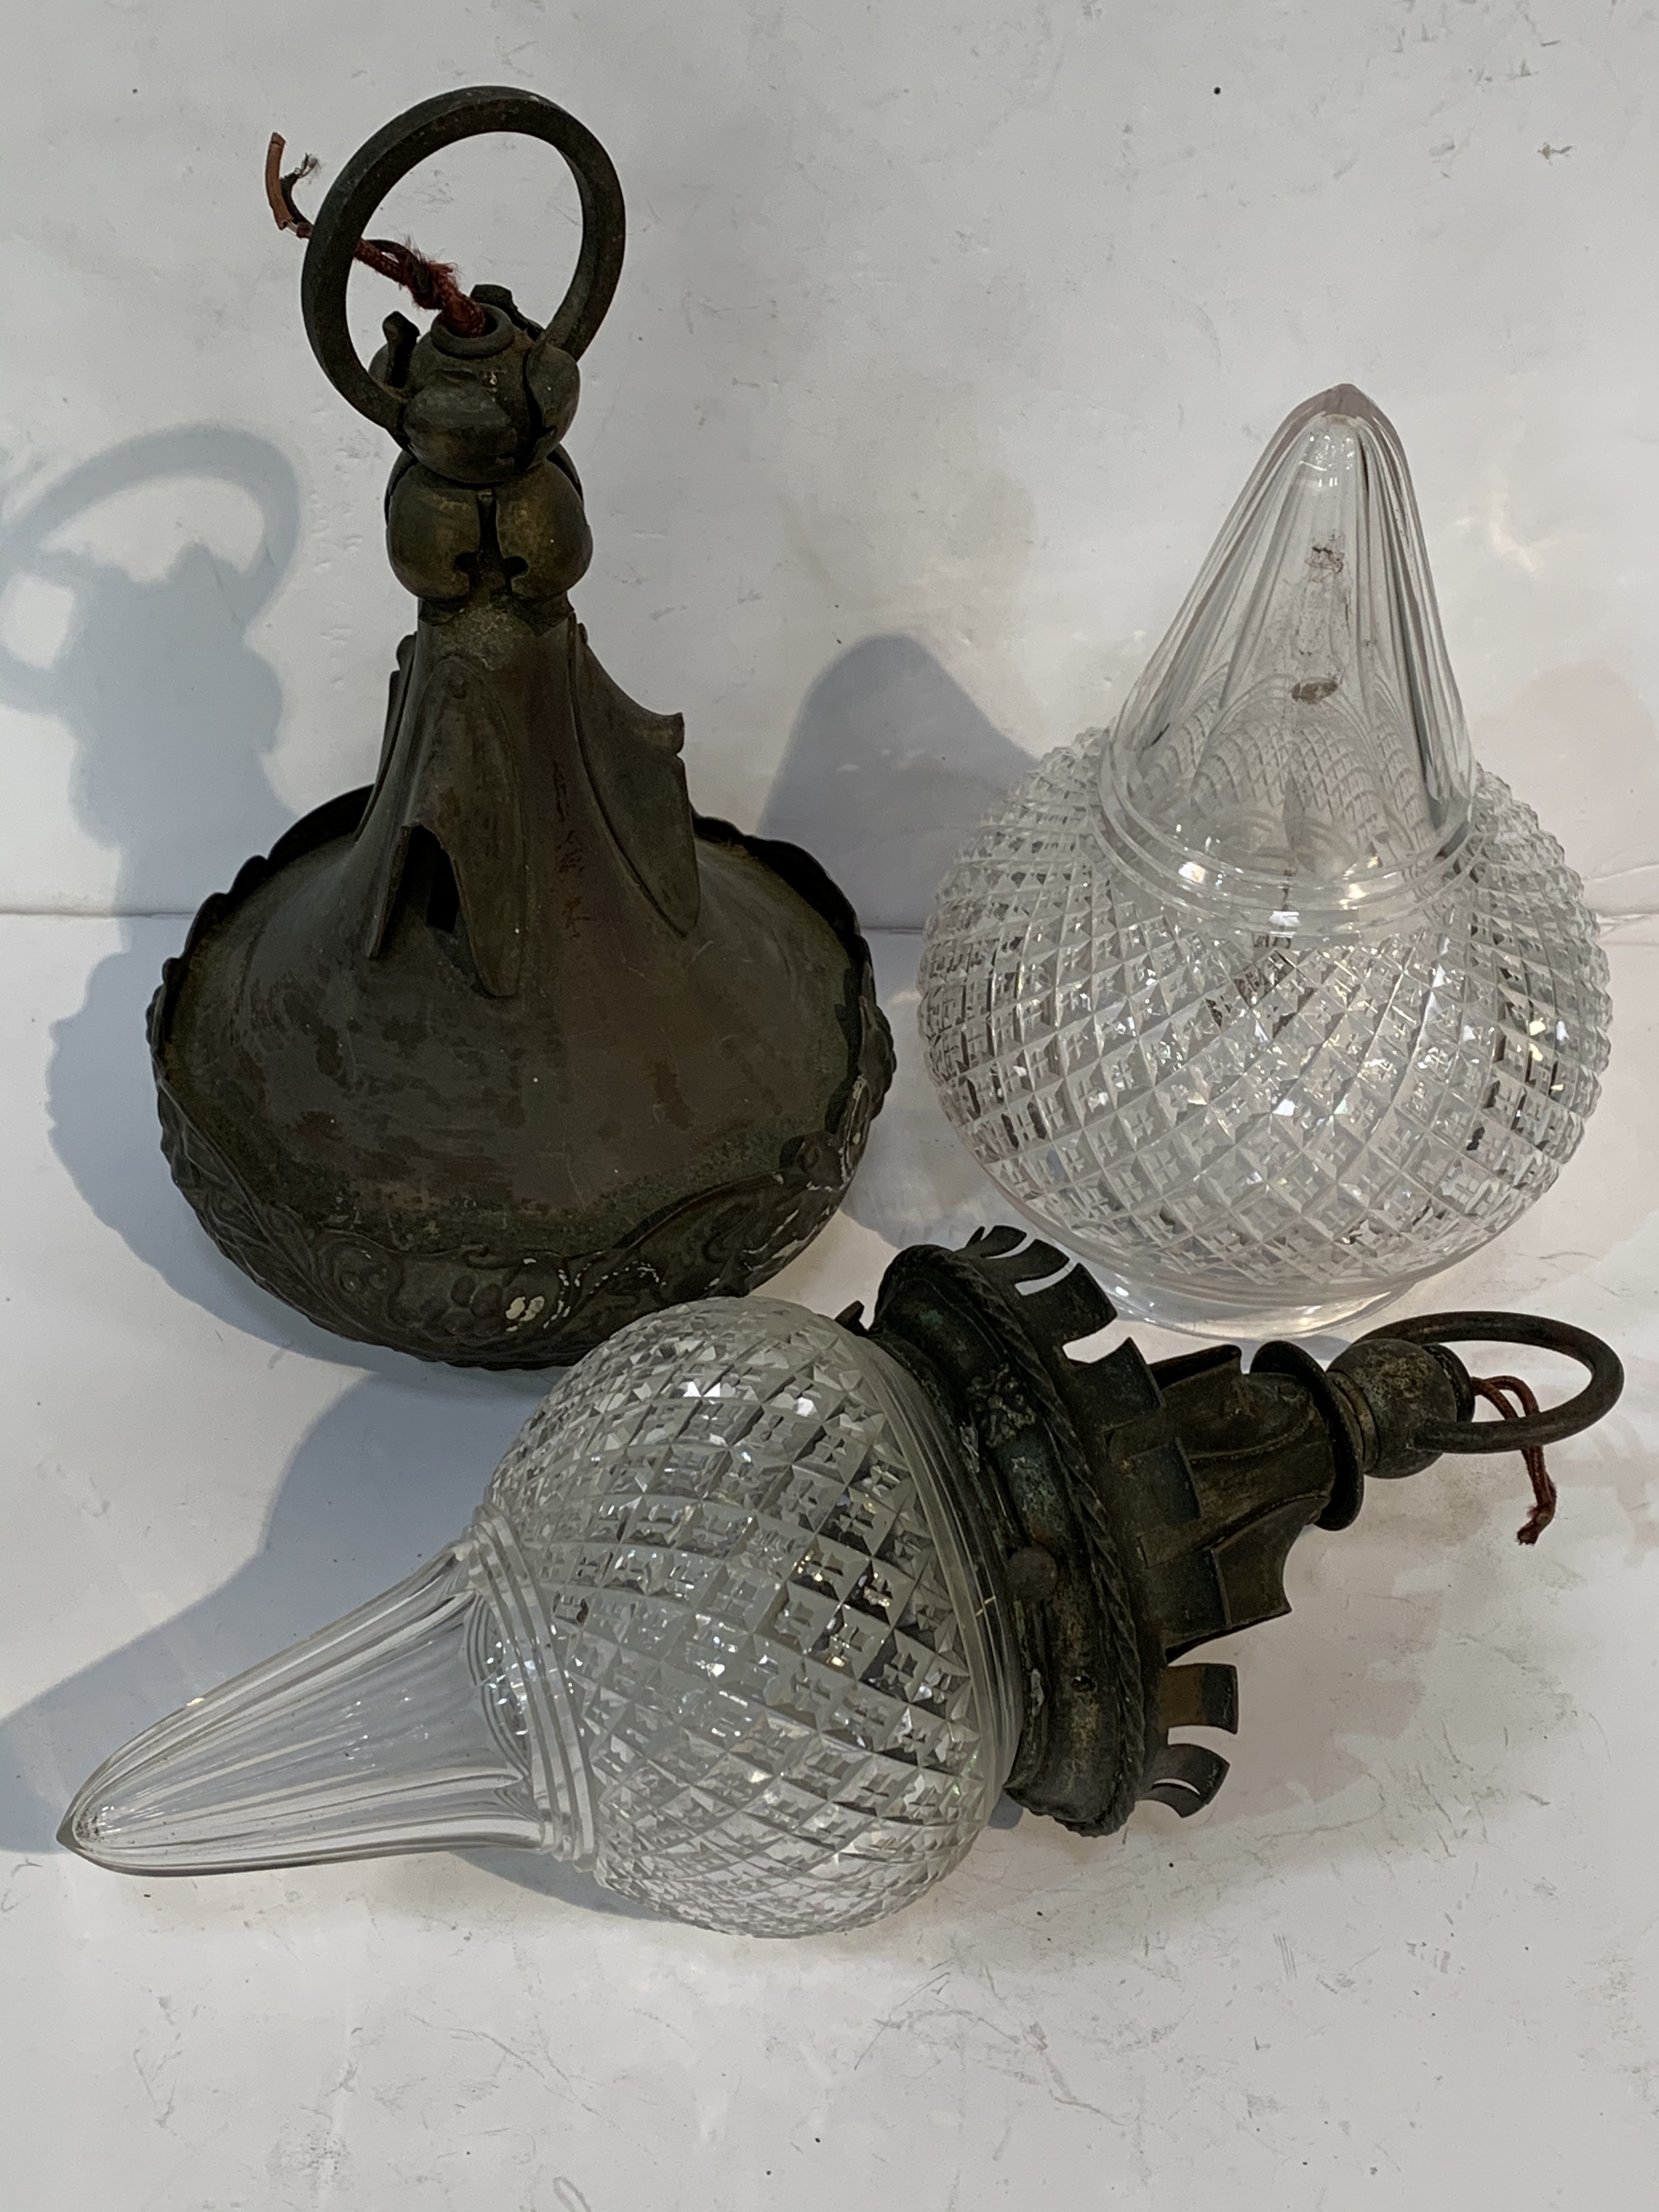 2 decorative metal and glass ceiling lights - Image 2 of 2